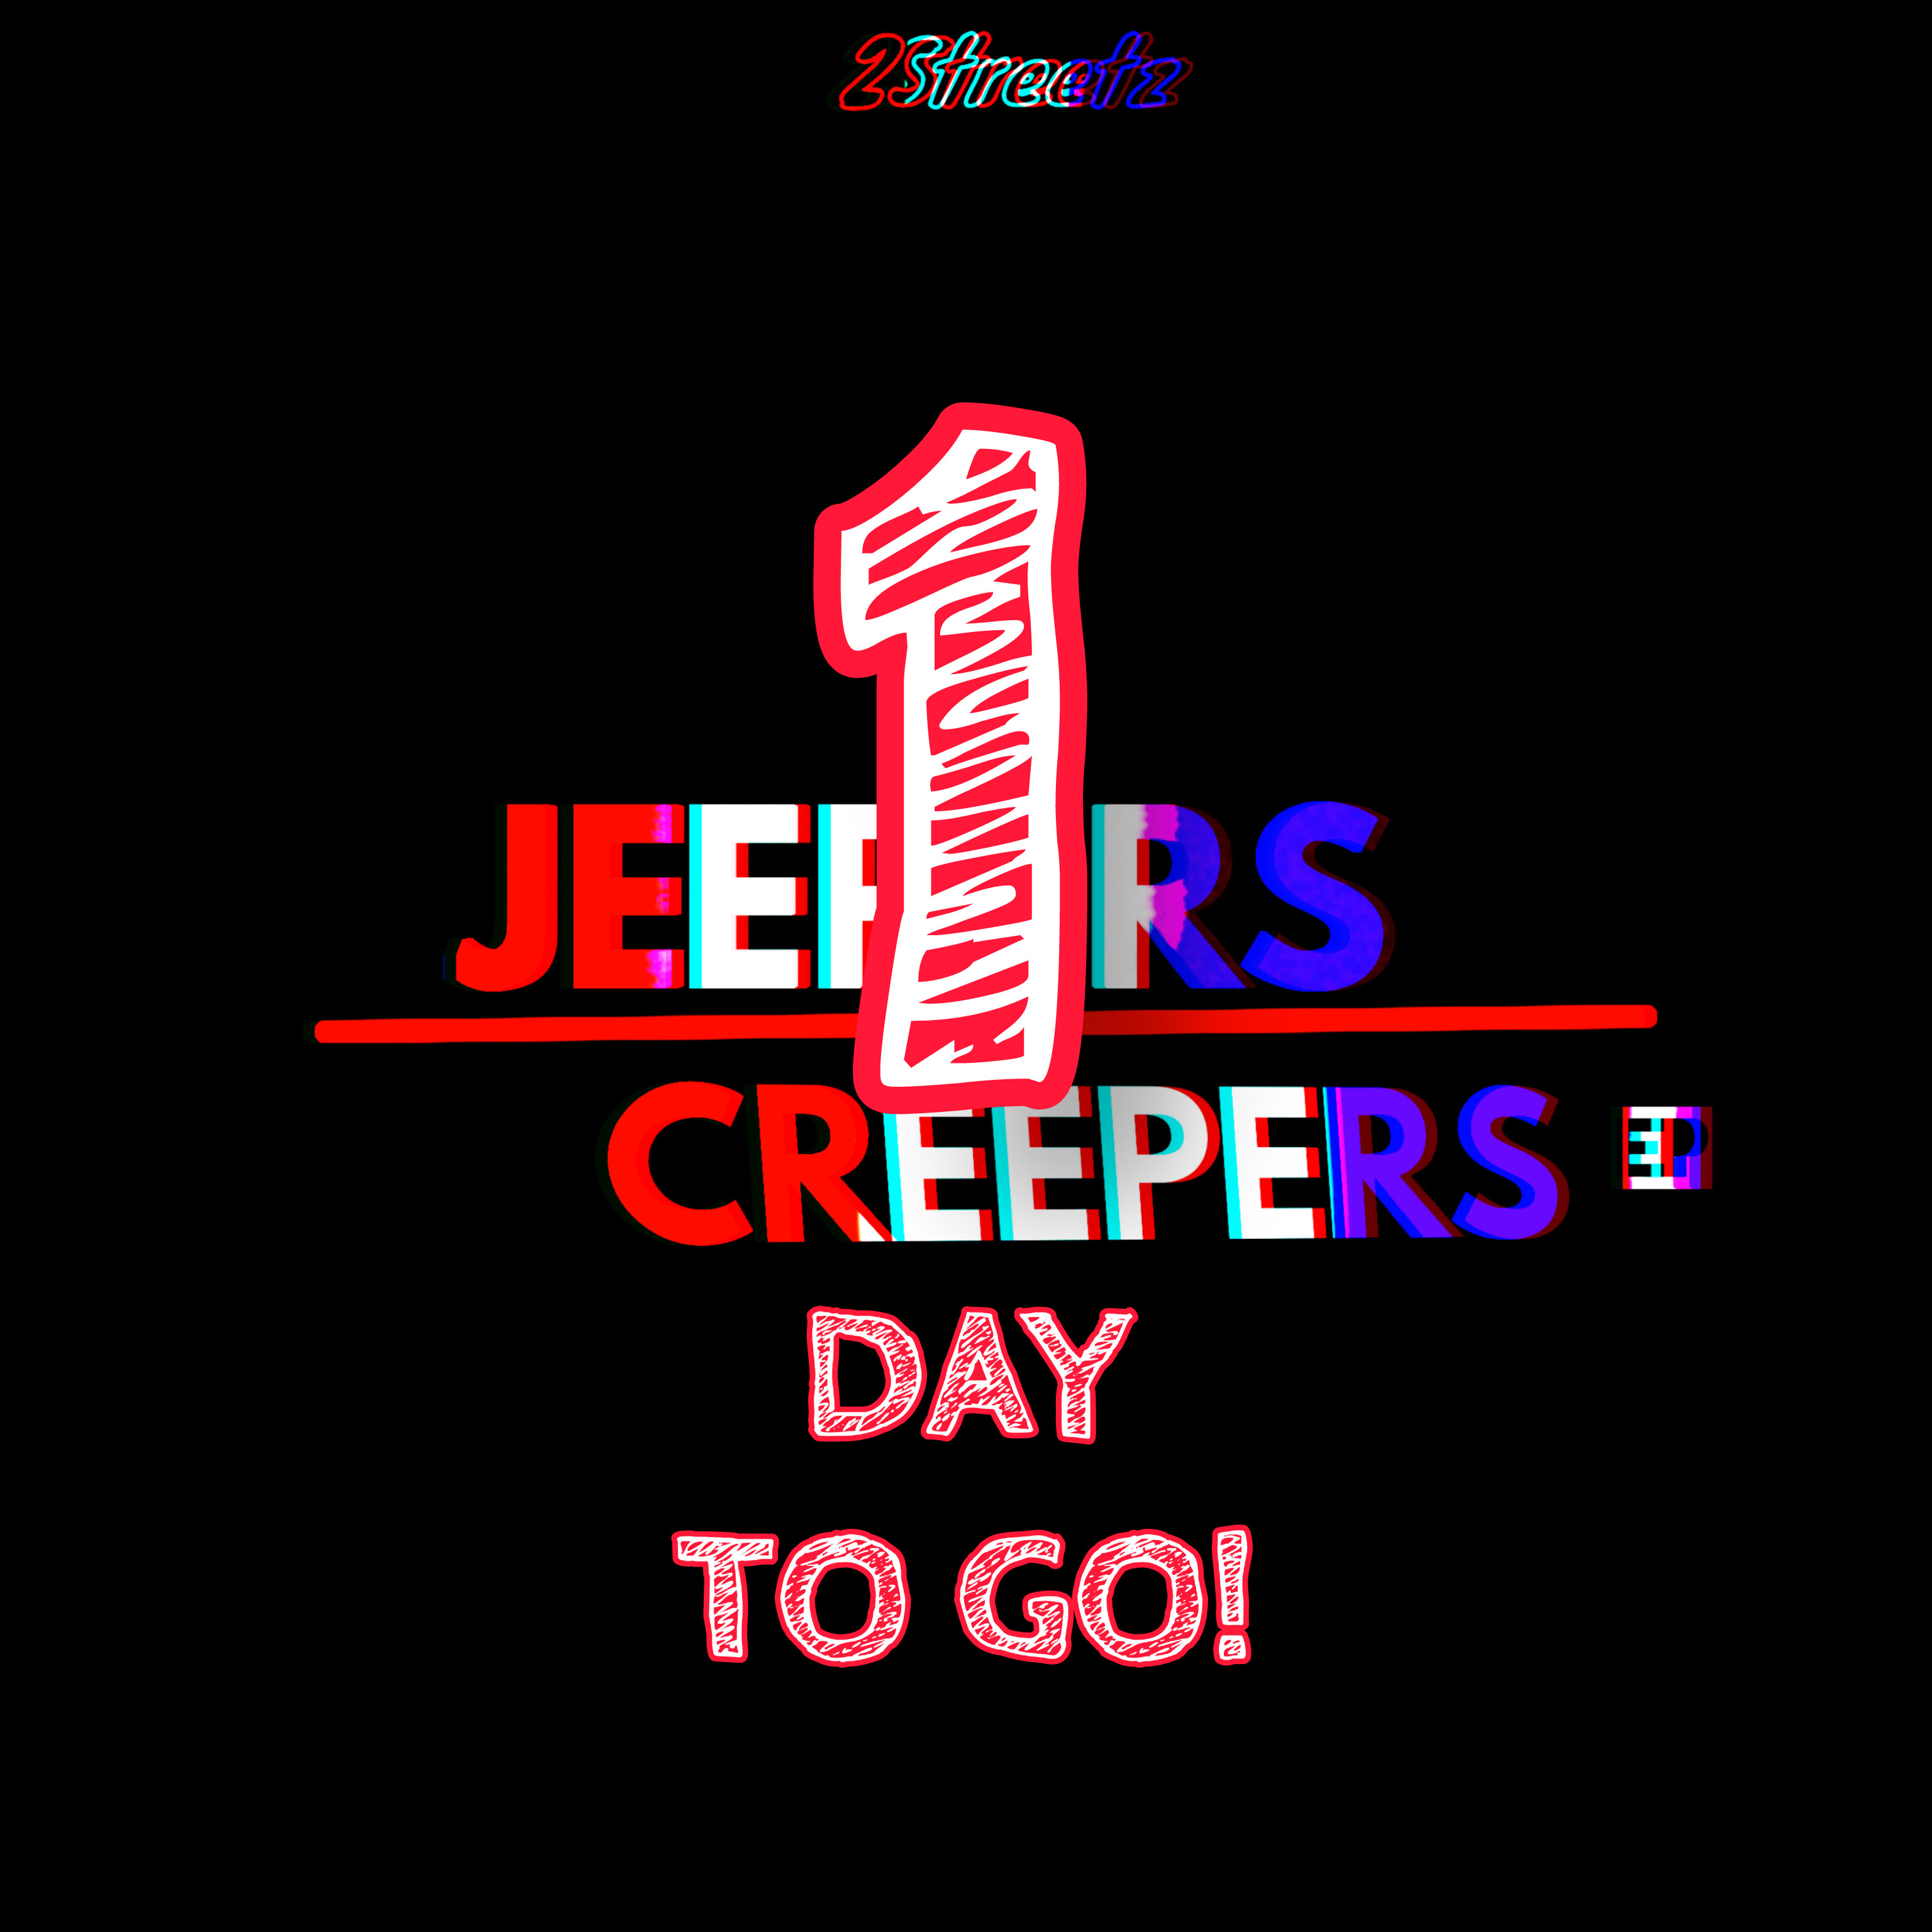 Jeepers creepers ep - Star Rsa, Michael Trailor